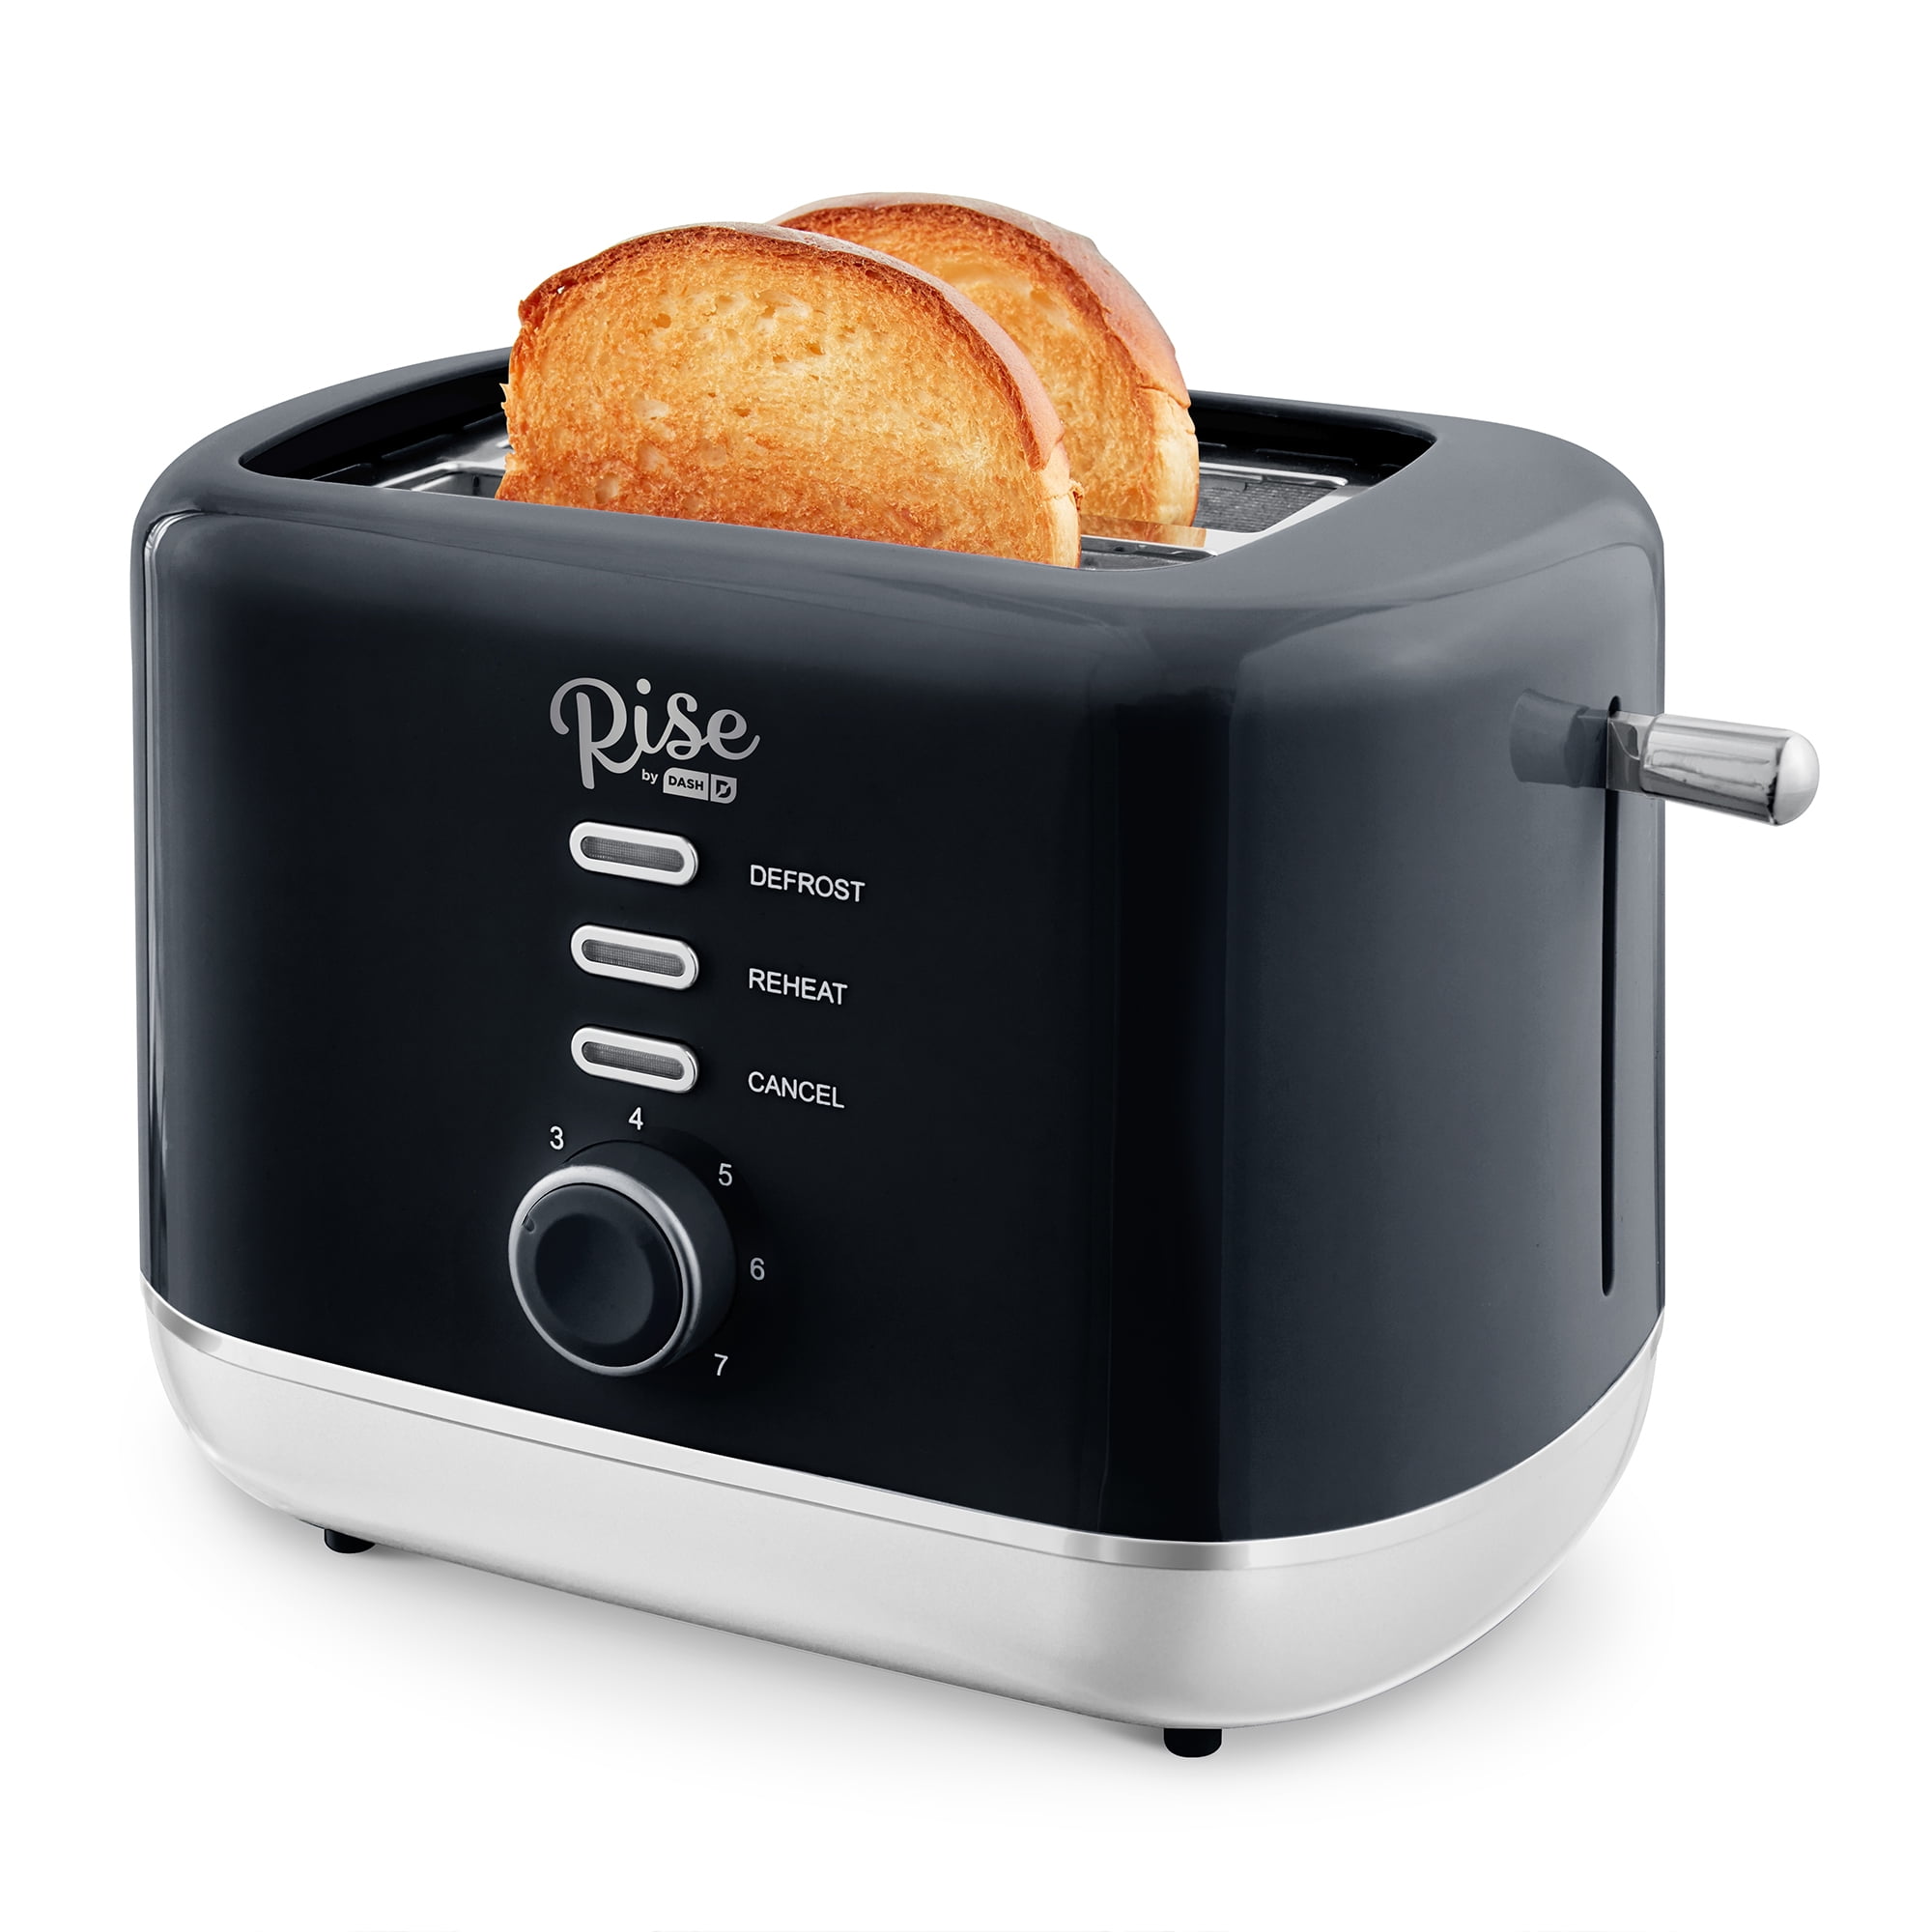 2,4 Slice Wide Standard Toaster Toast Reheat Cancel Browning Control Function 